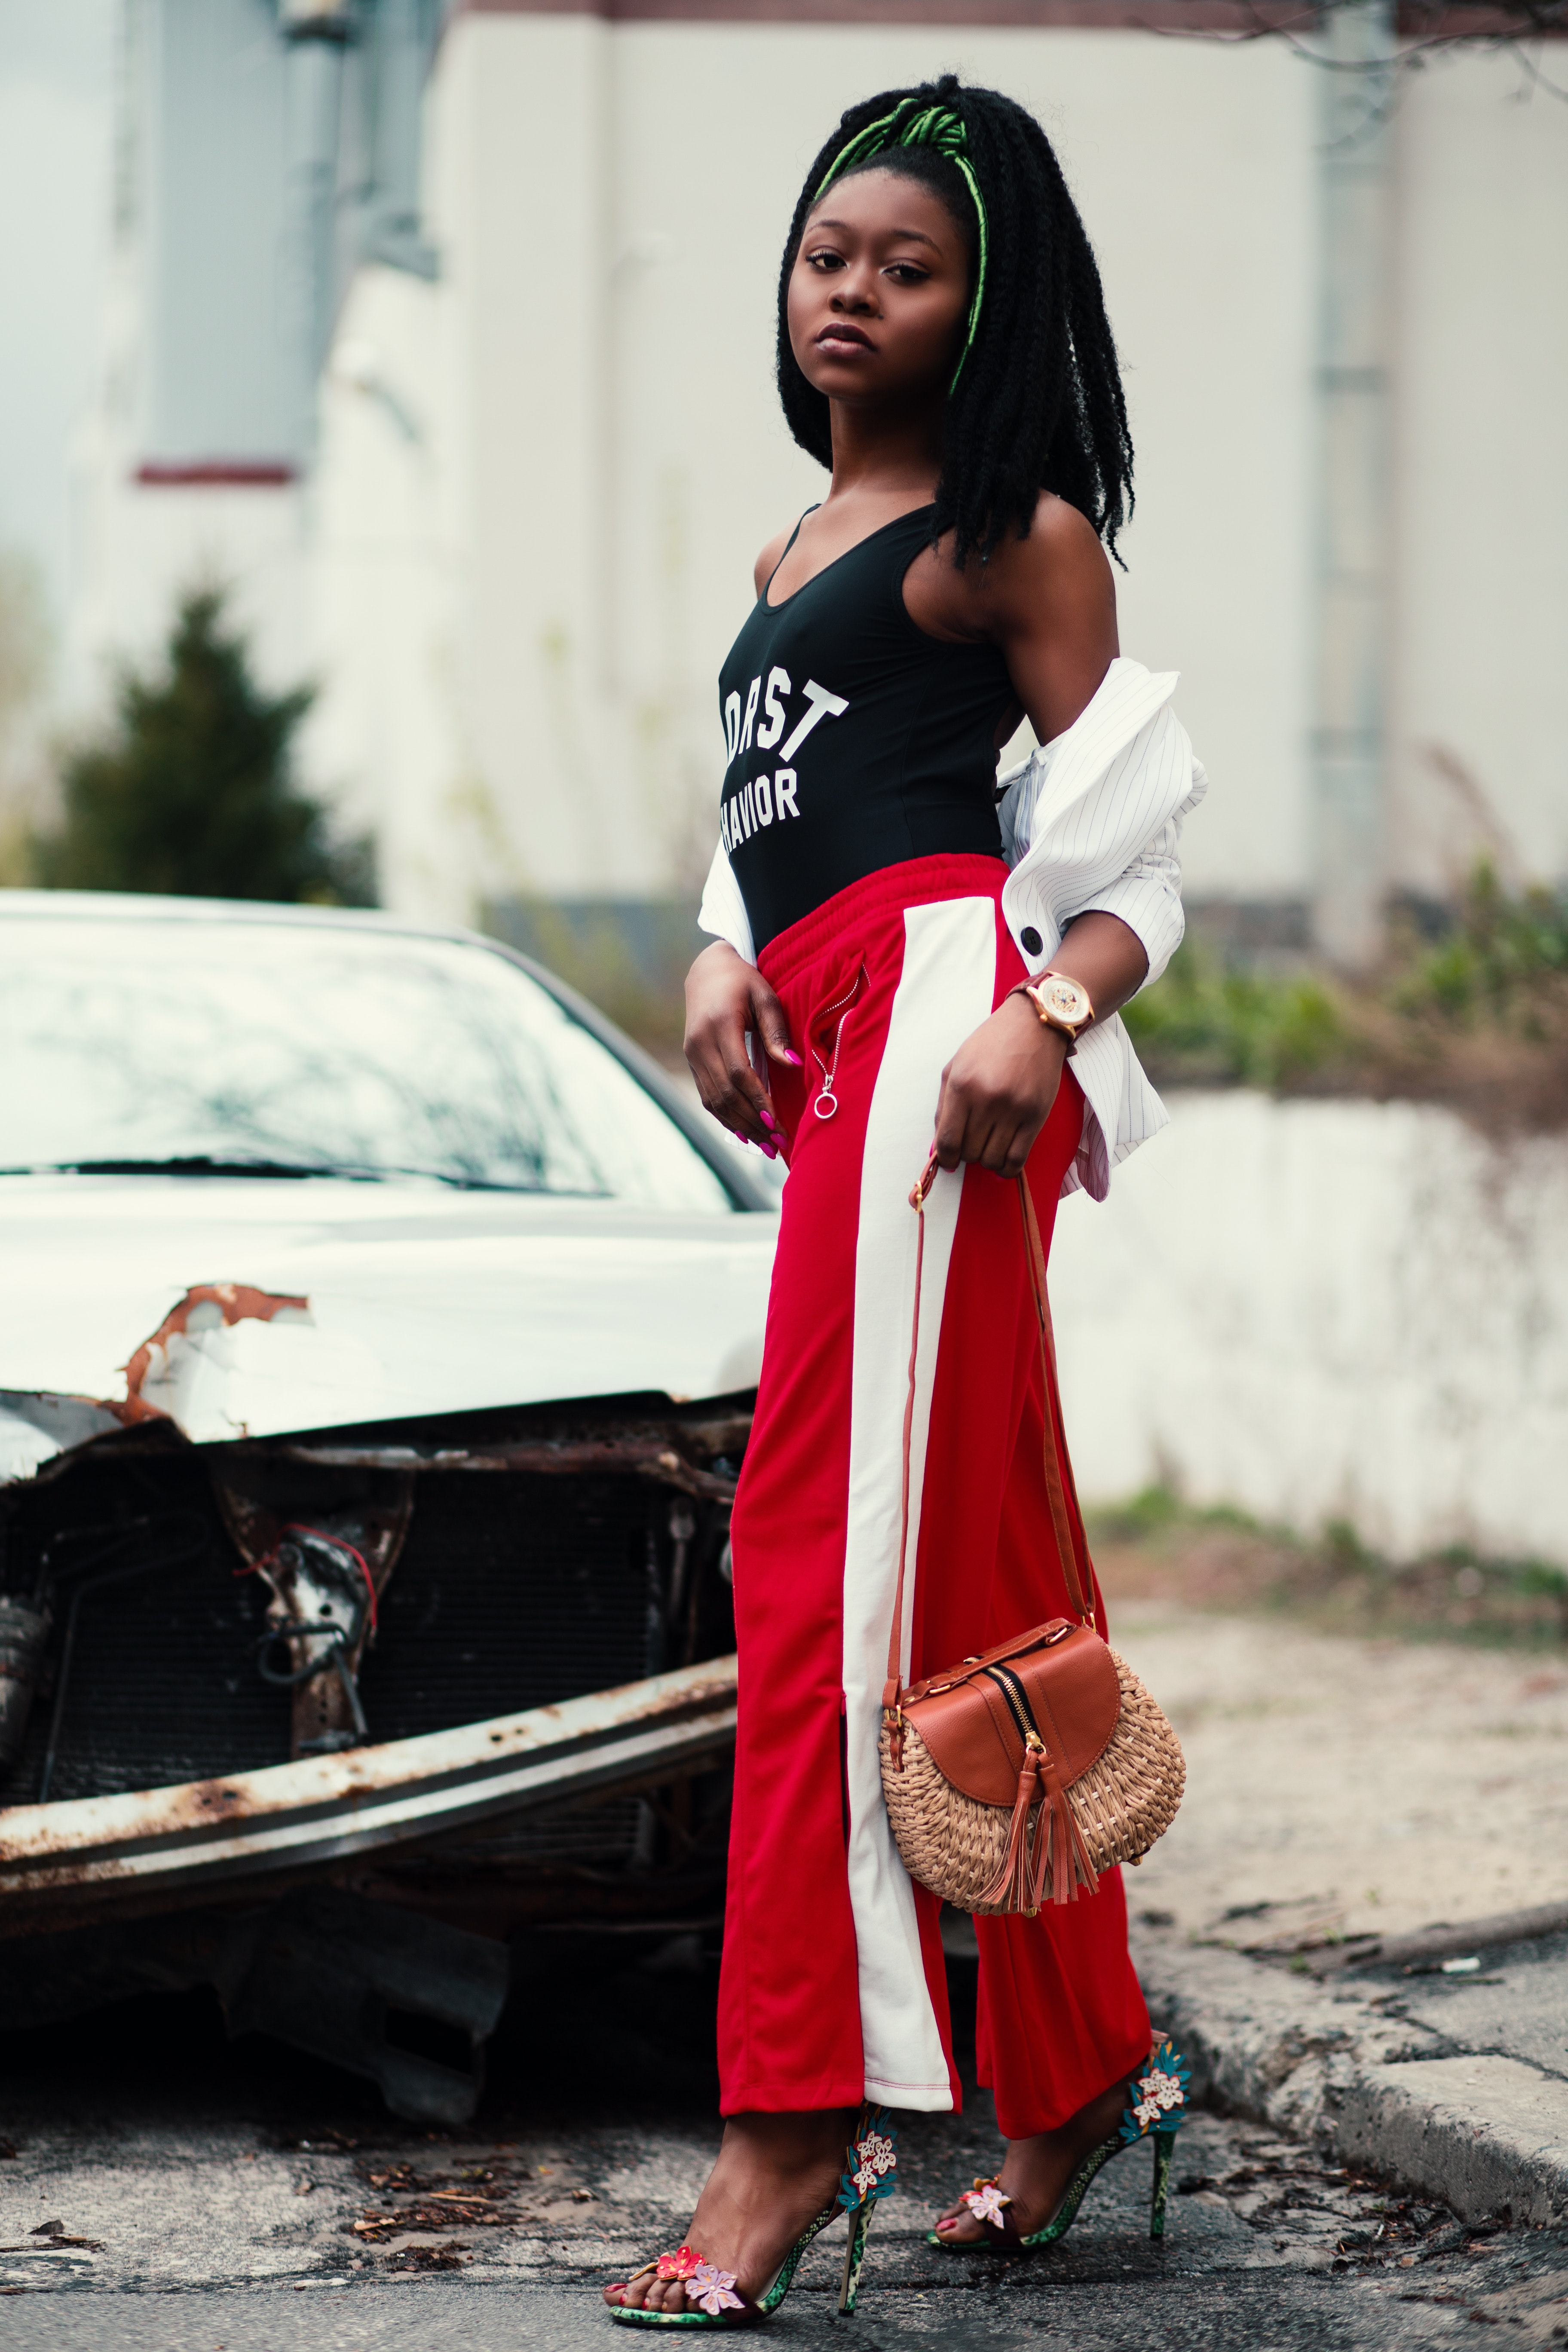 Women's black tank top and red track pants walking on street photo